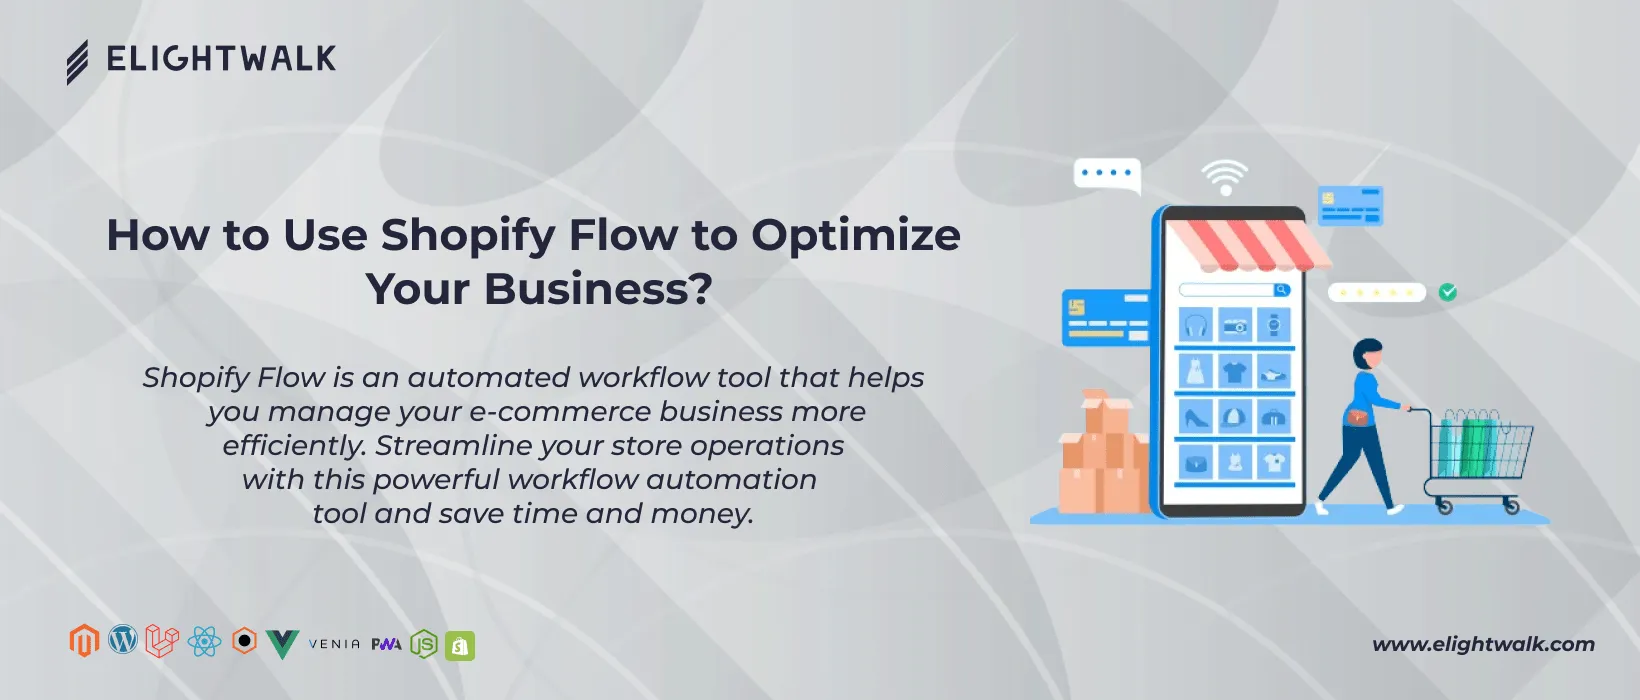 Use of Shopify Workflow in Business